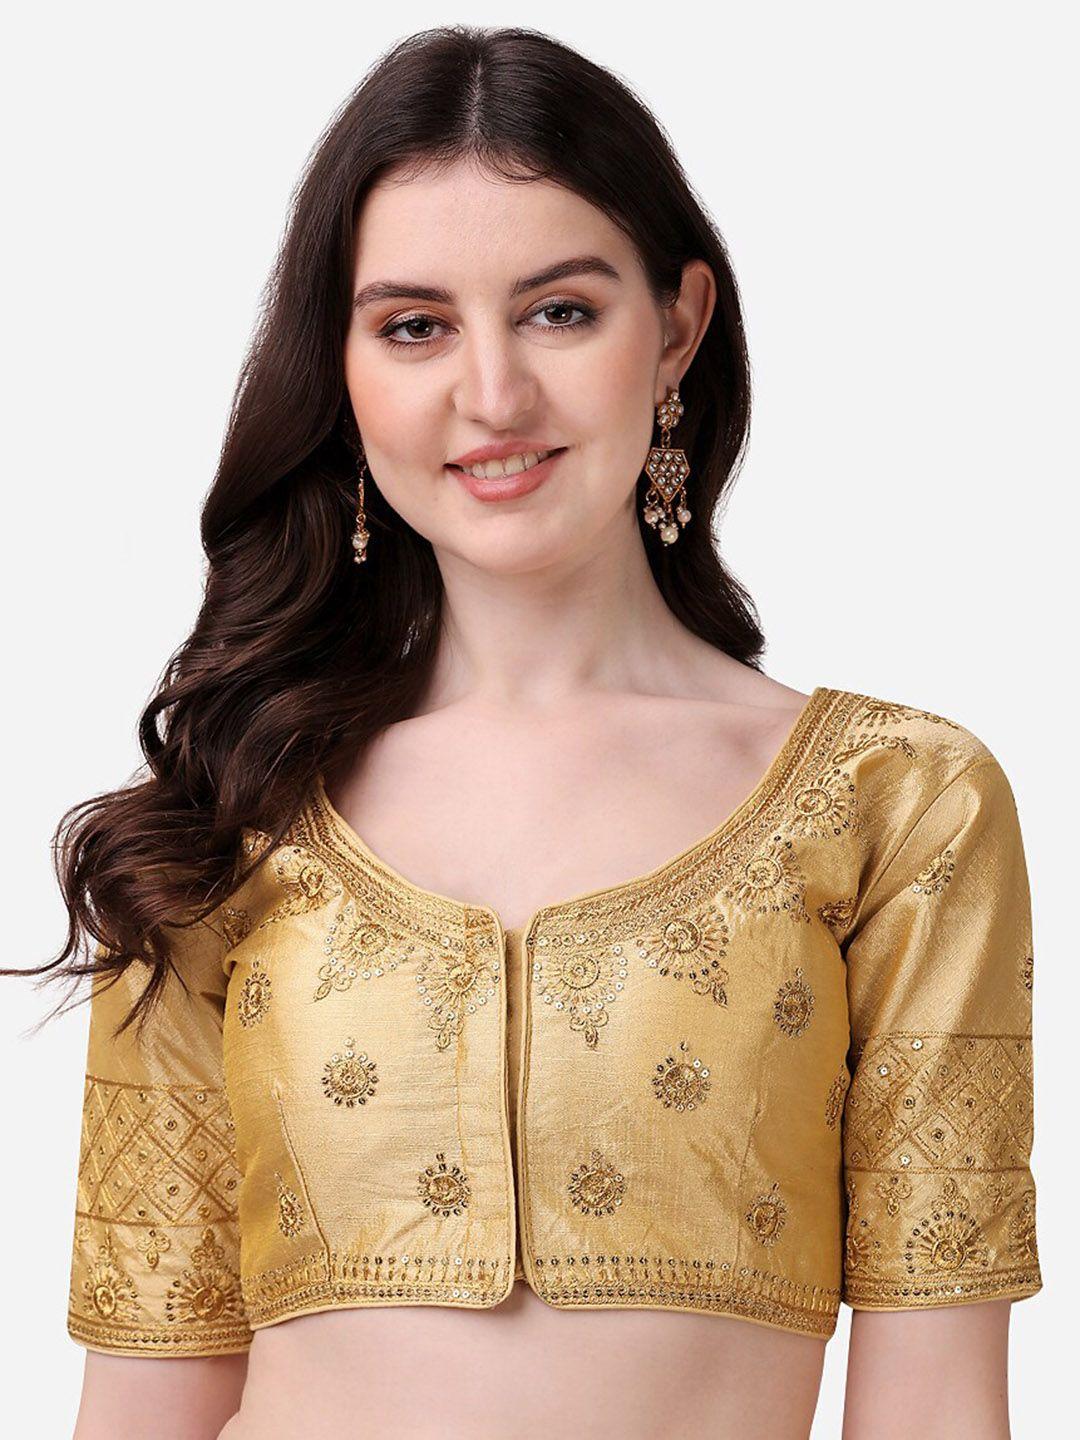 pujia mills women gold-colored embroidered saree blouse